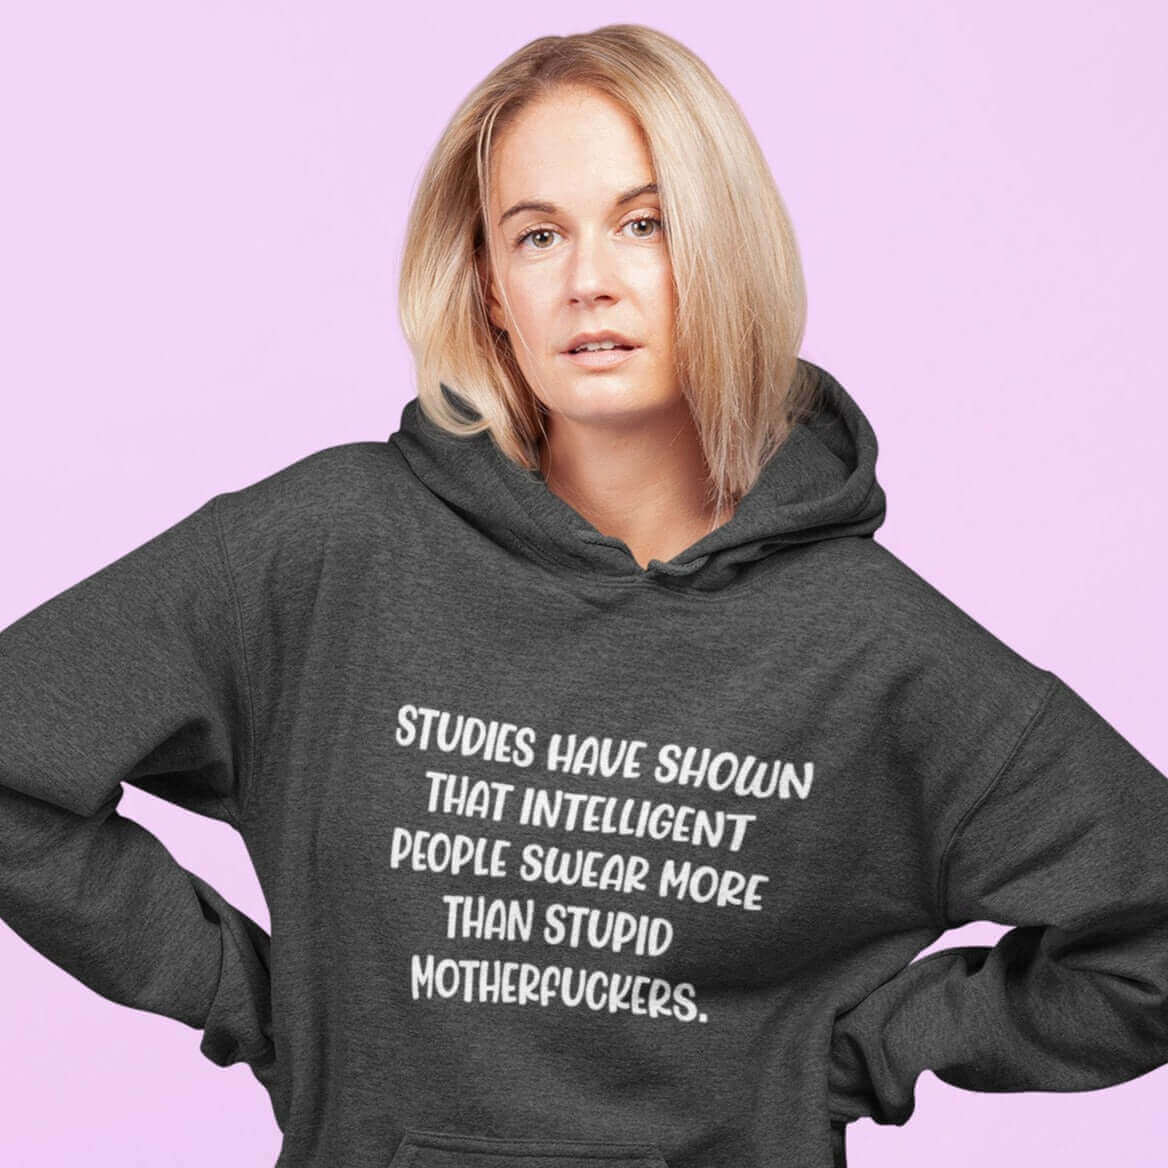 Woman wearing dark grey hoodie sweatshirt with the funny phrase Studies have shown that intelligent people swear more than stupid motherfuckers printed on the front.